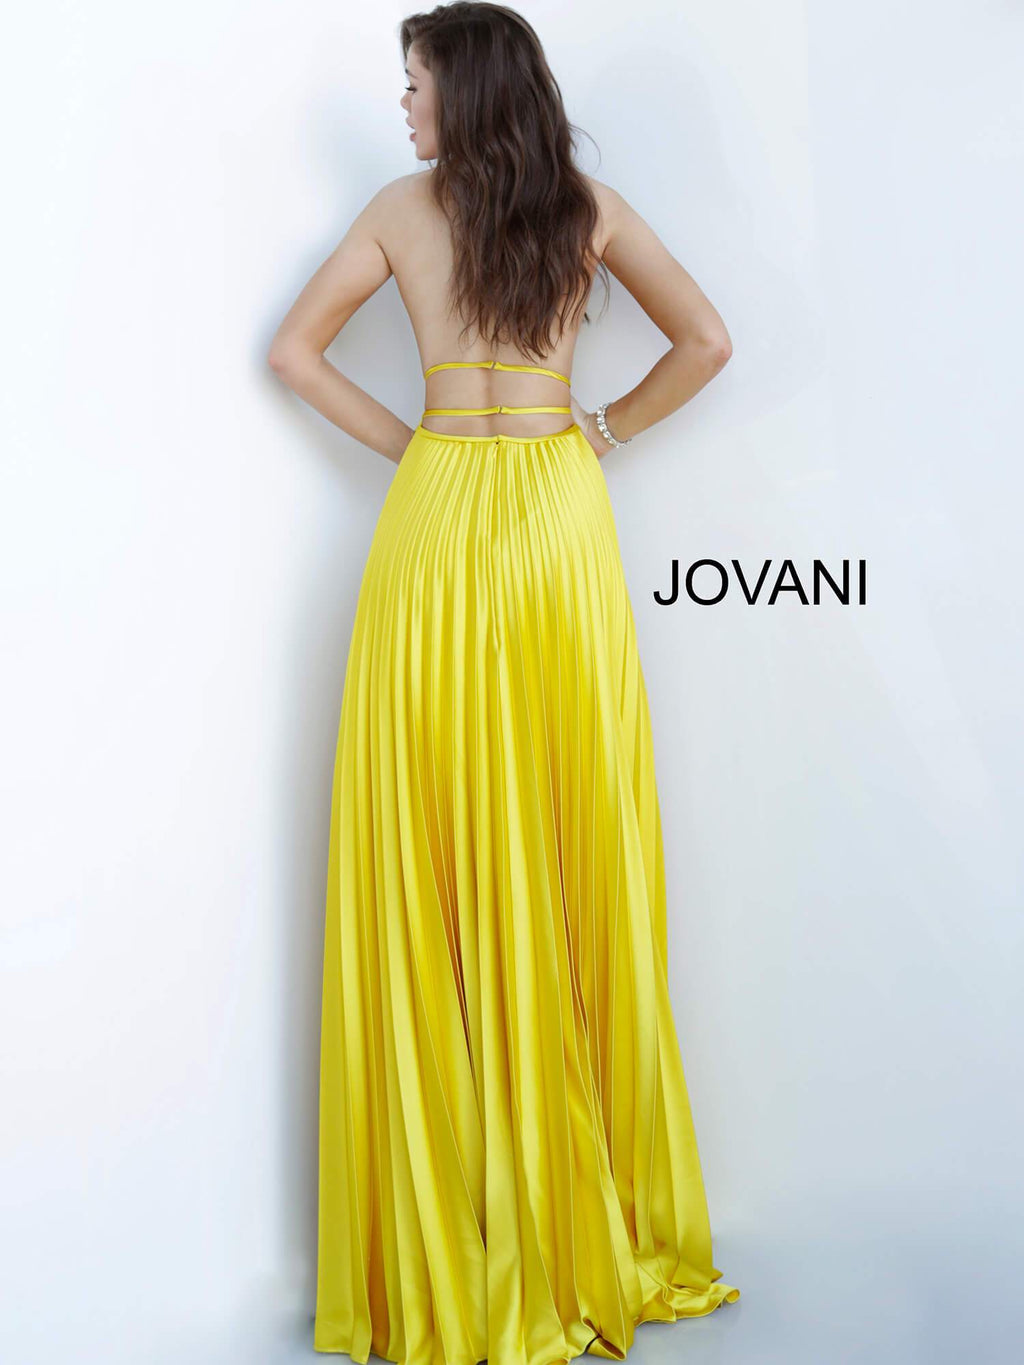 JOVANI 006370 Backless Pleated Satin Evening Dress - CYC Boutique